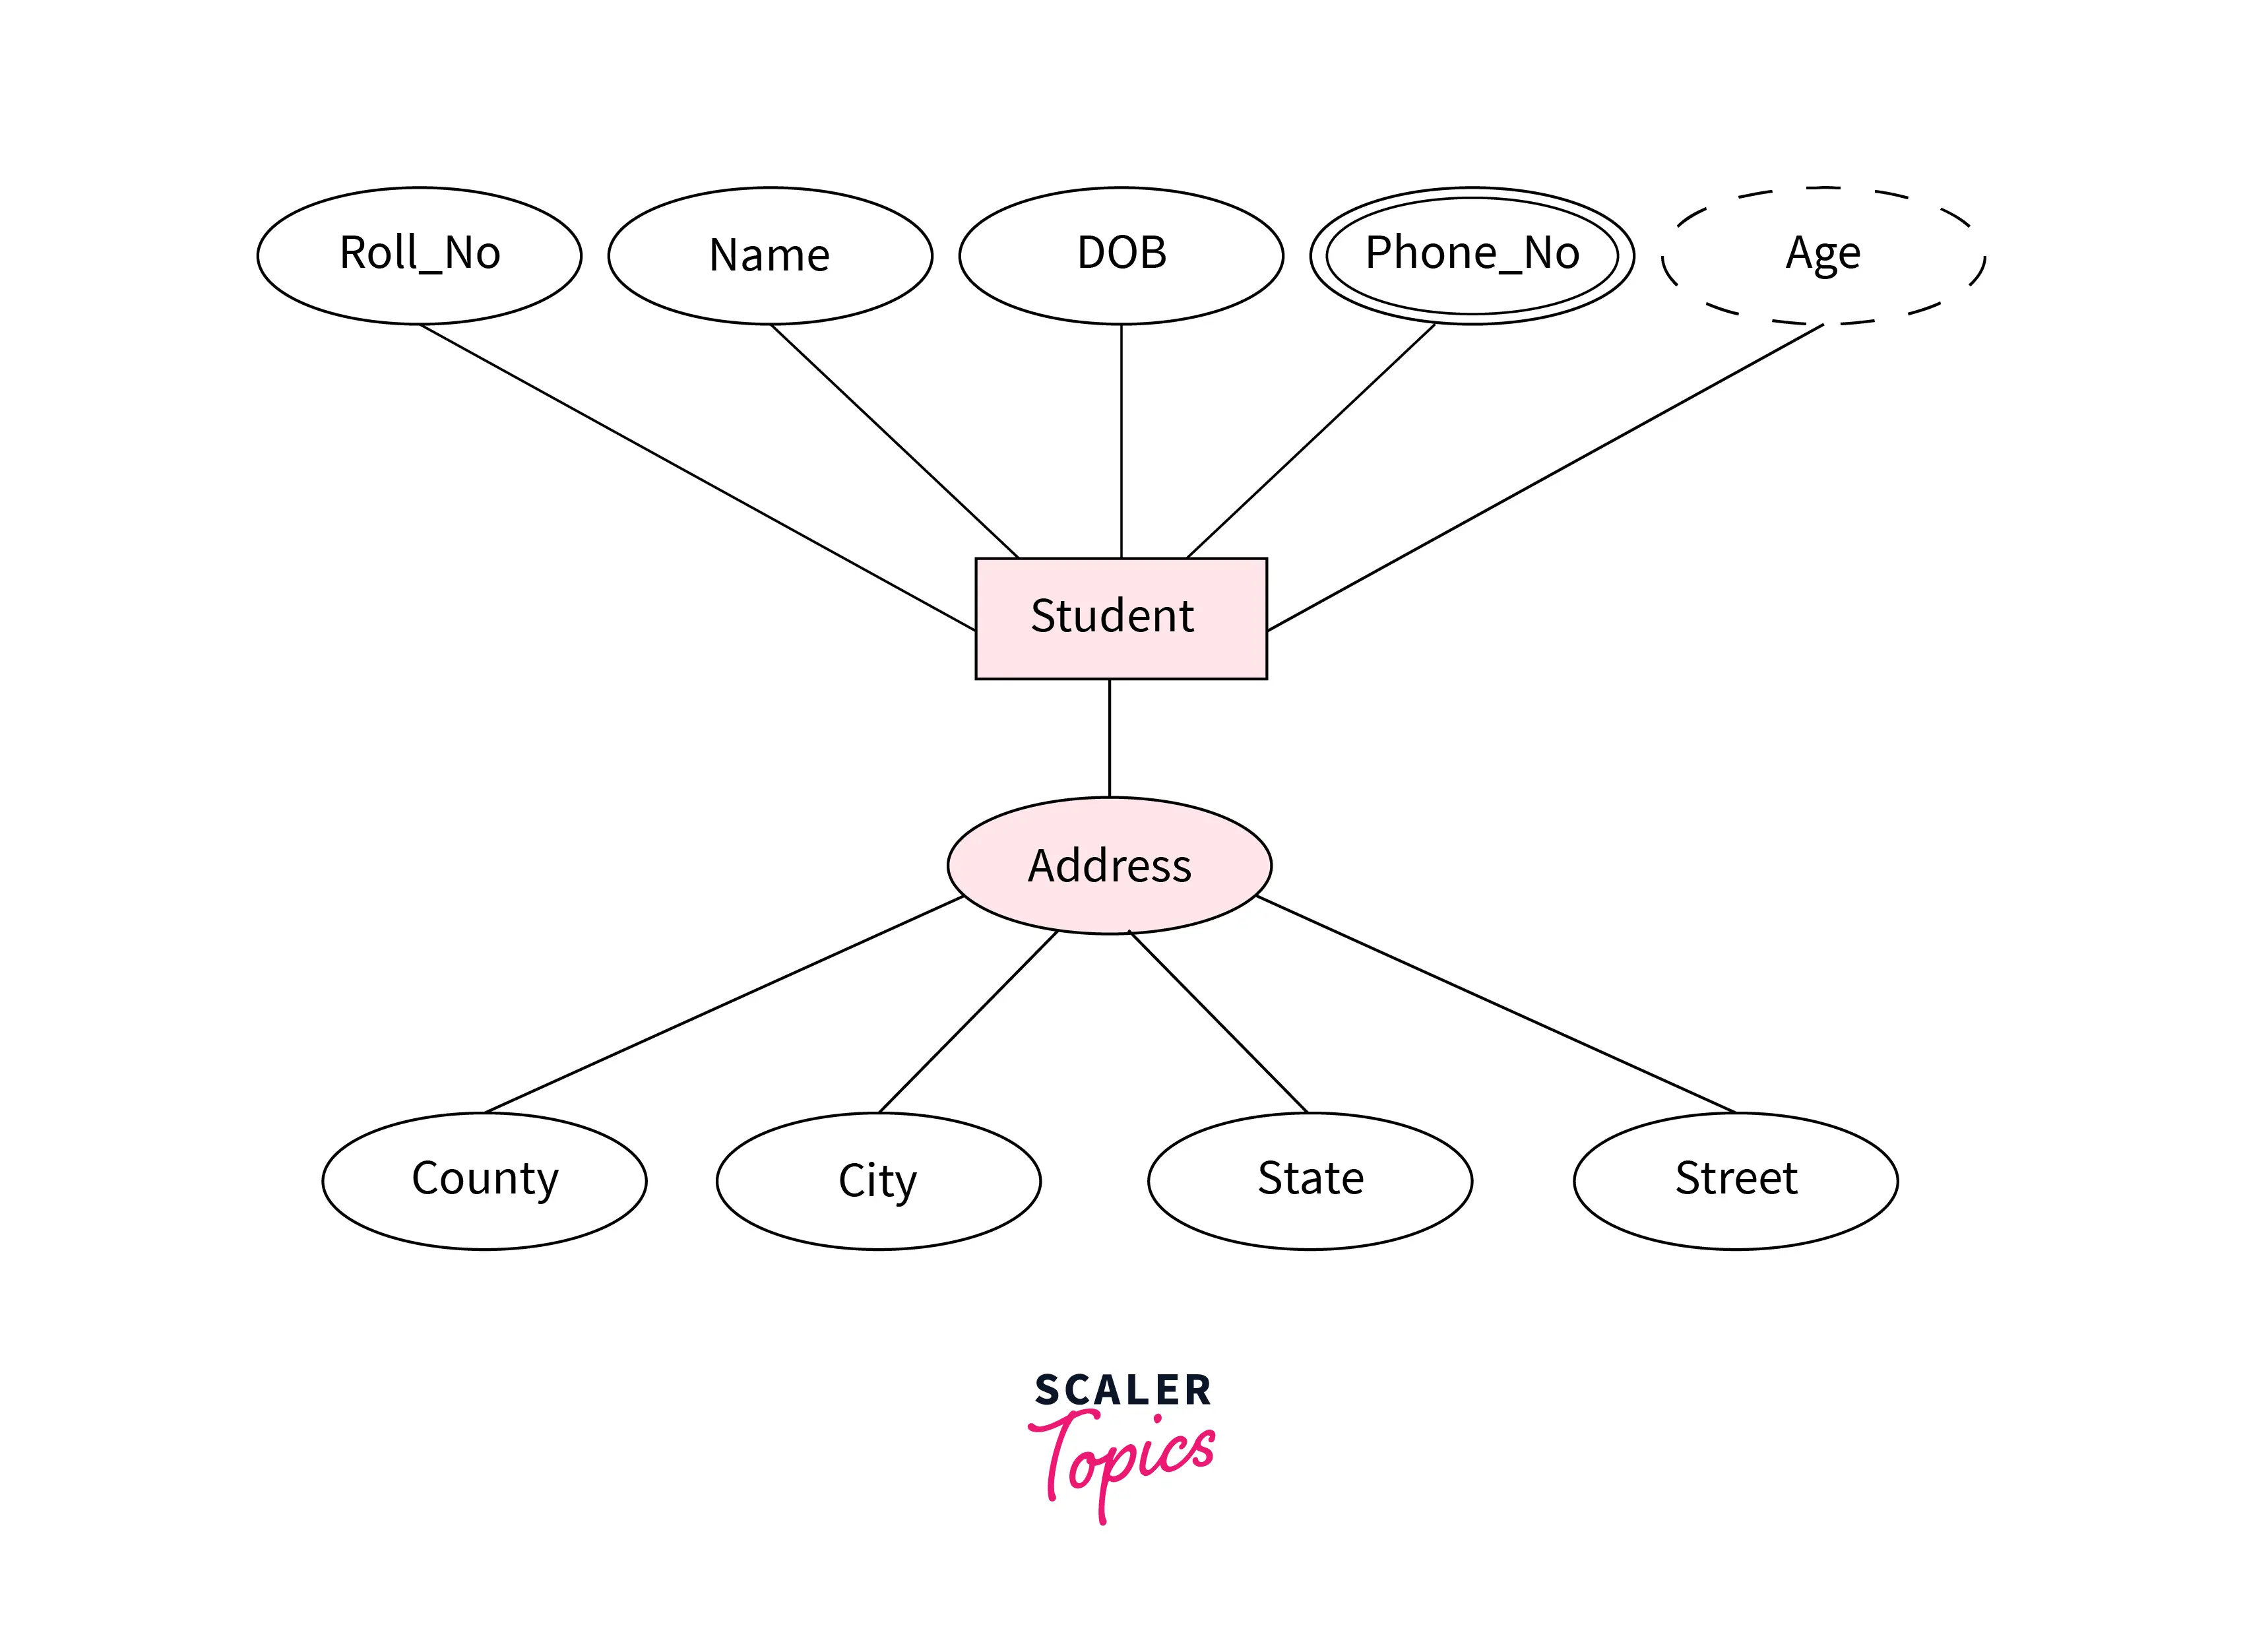 complete student entity type having different types of attributes